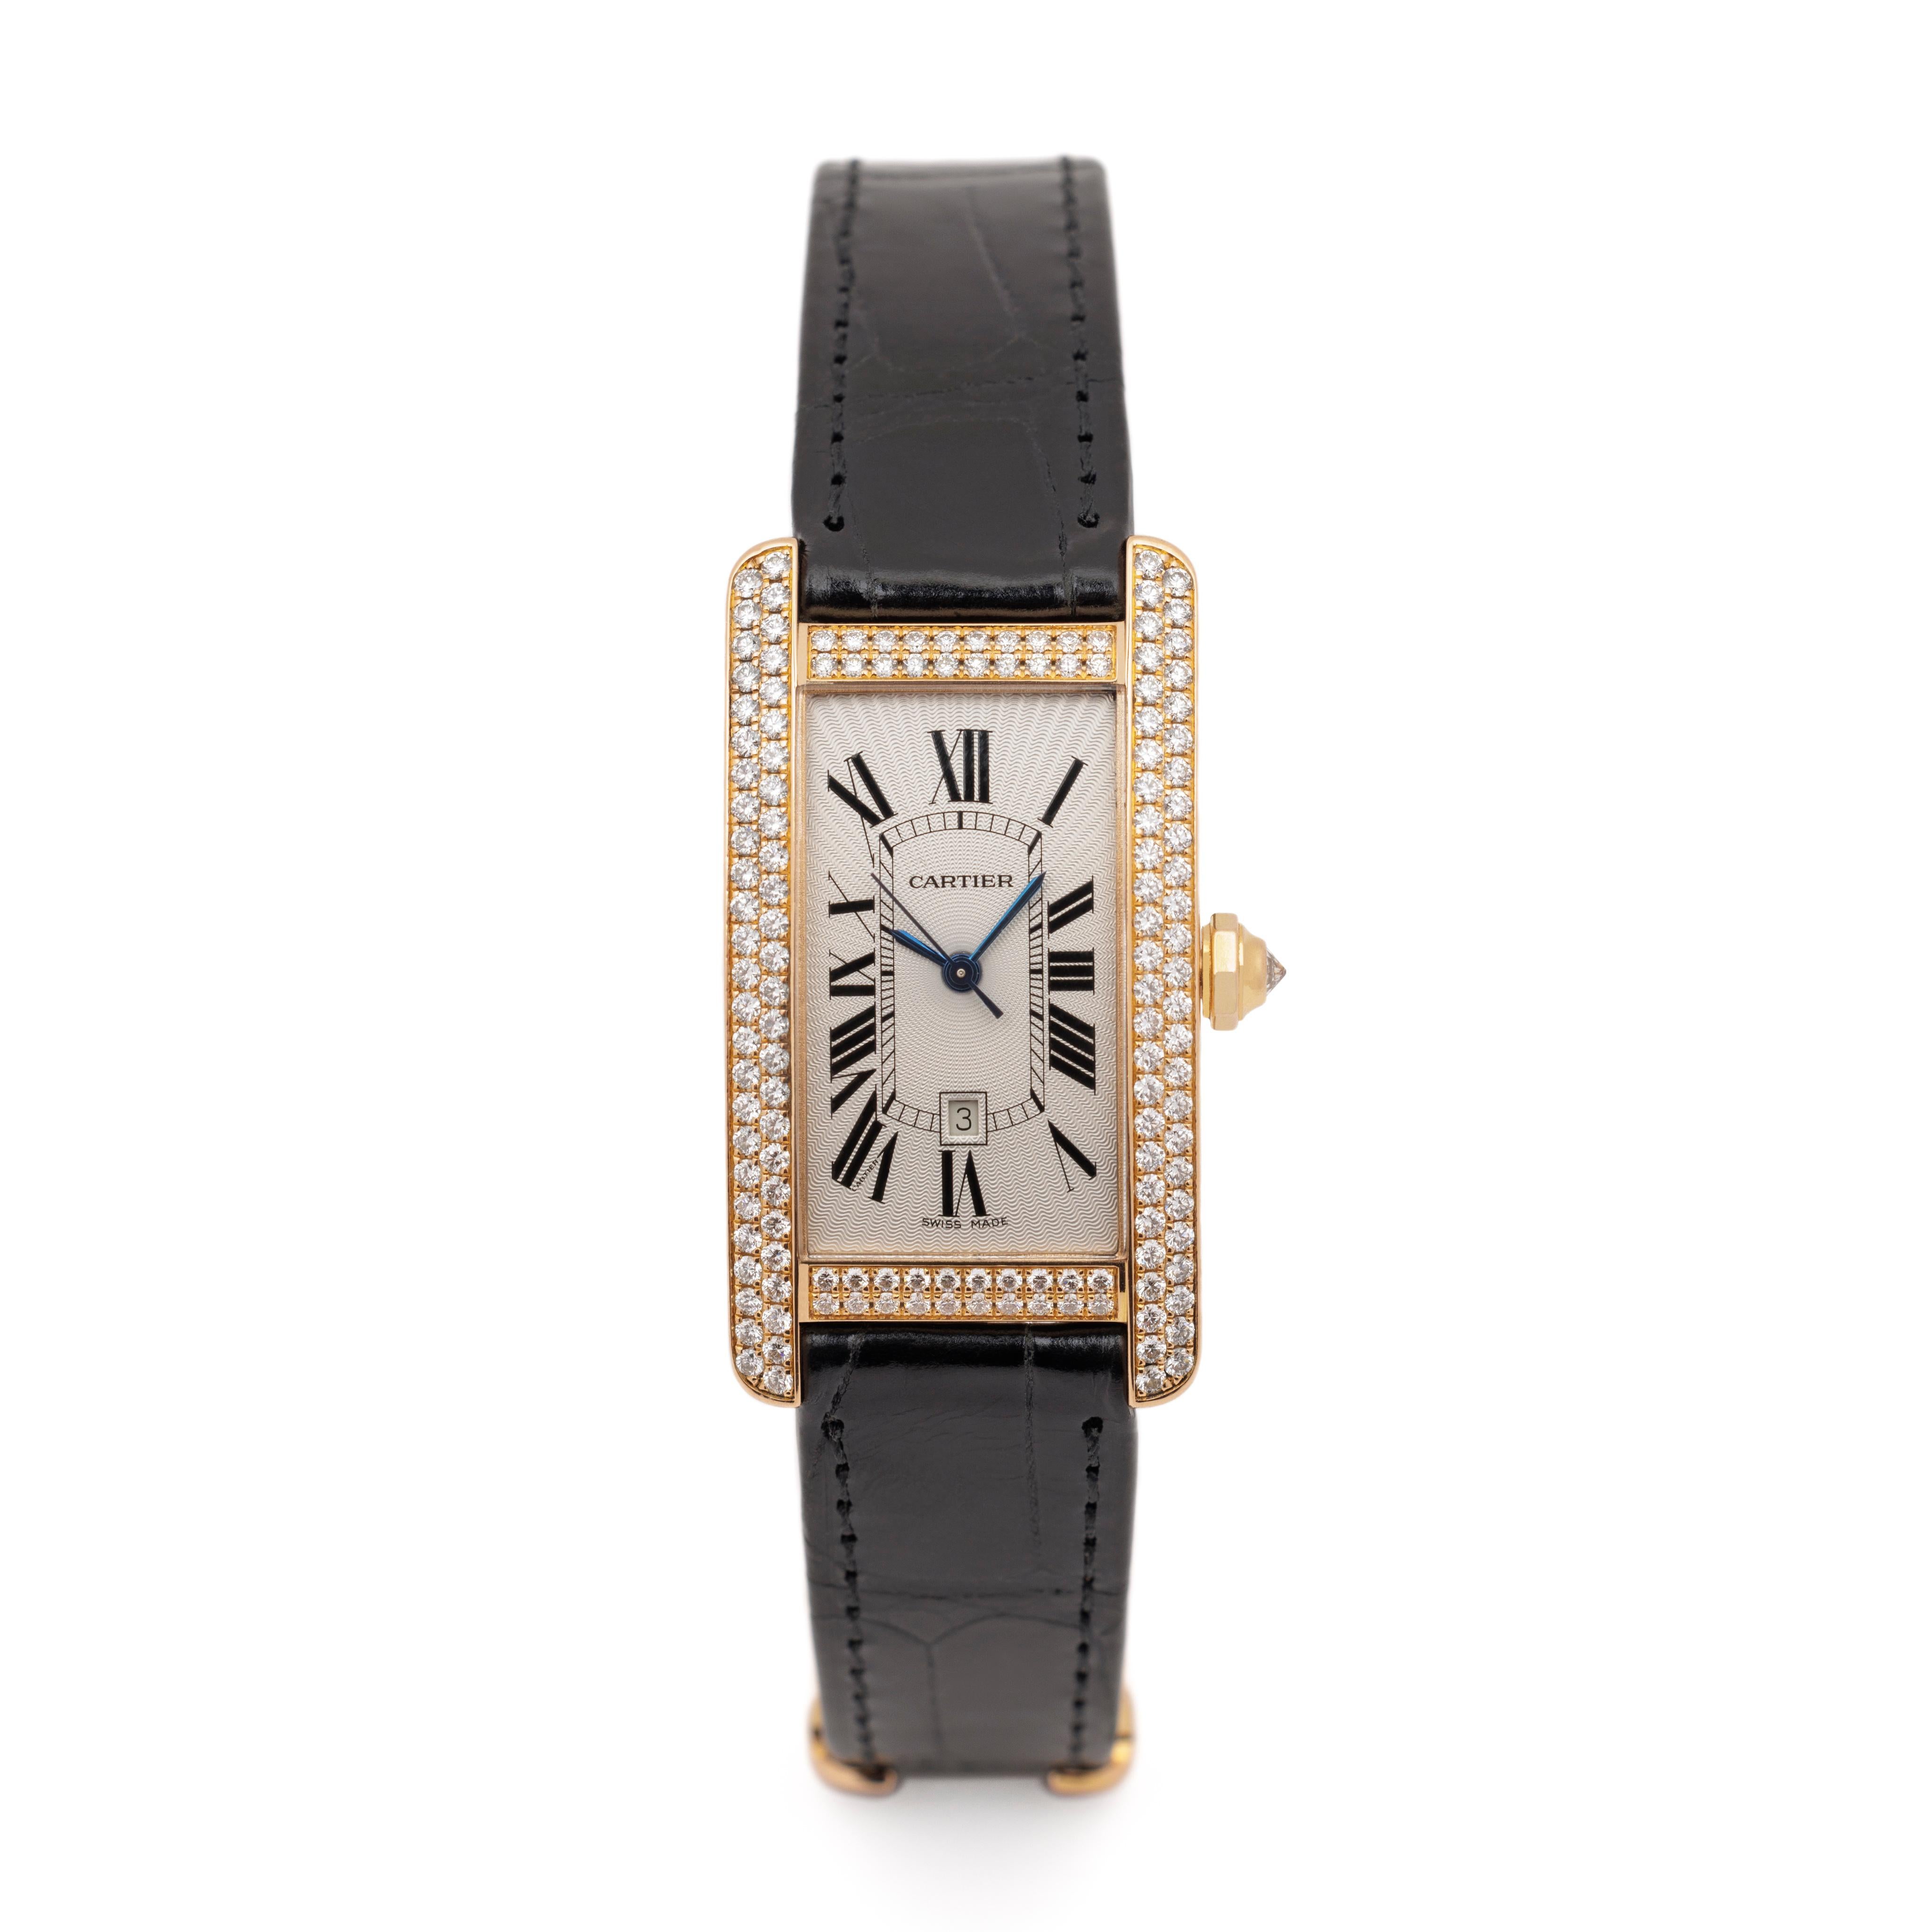 Cartier Tank Américaine with double row diamonds
Model 2504  
18k Rose Gold 
Serial 136XXXX 
Automatic Movement 
c.2010
Excellent unworn condition. Ships in Cartier Original Box.

Introducing the Cartier Tank Américaine Model 2504, with a dazzling